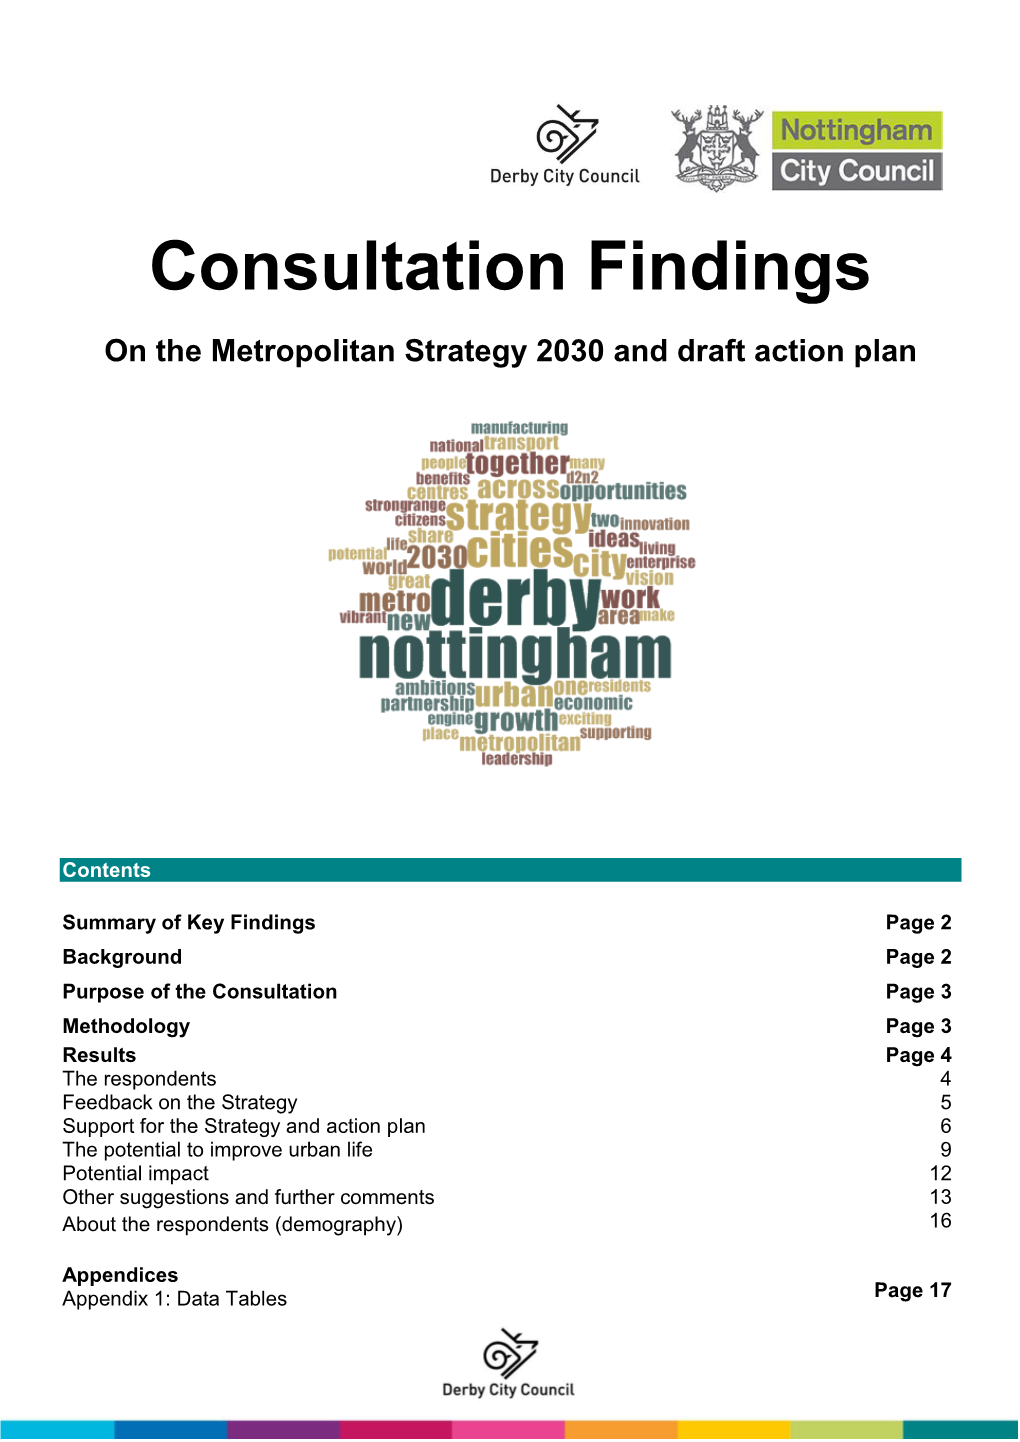 Consultation Findings on the Metropolitan Strategy 2030 and Draft Action Plan